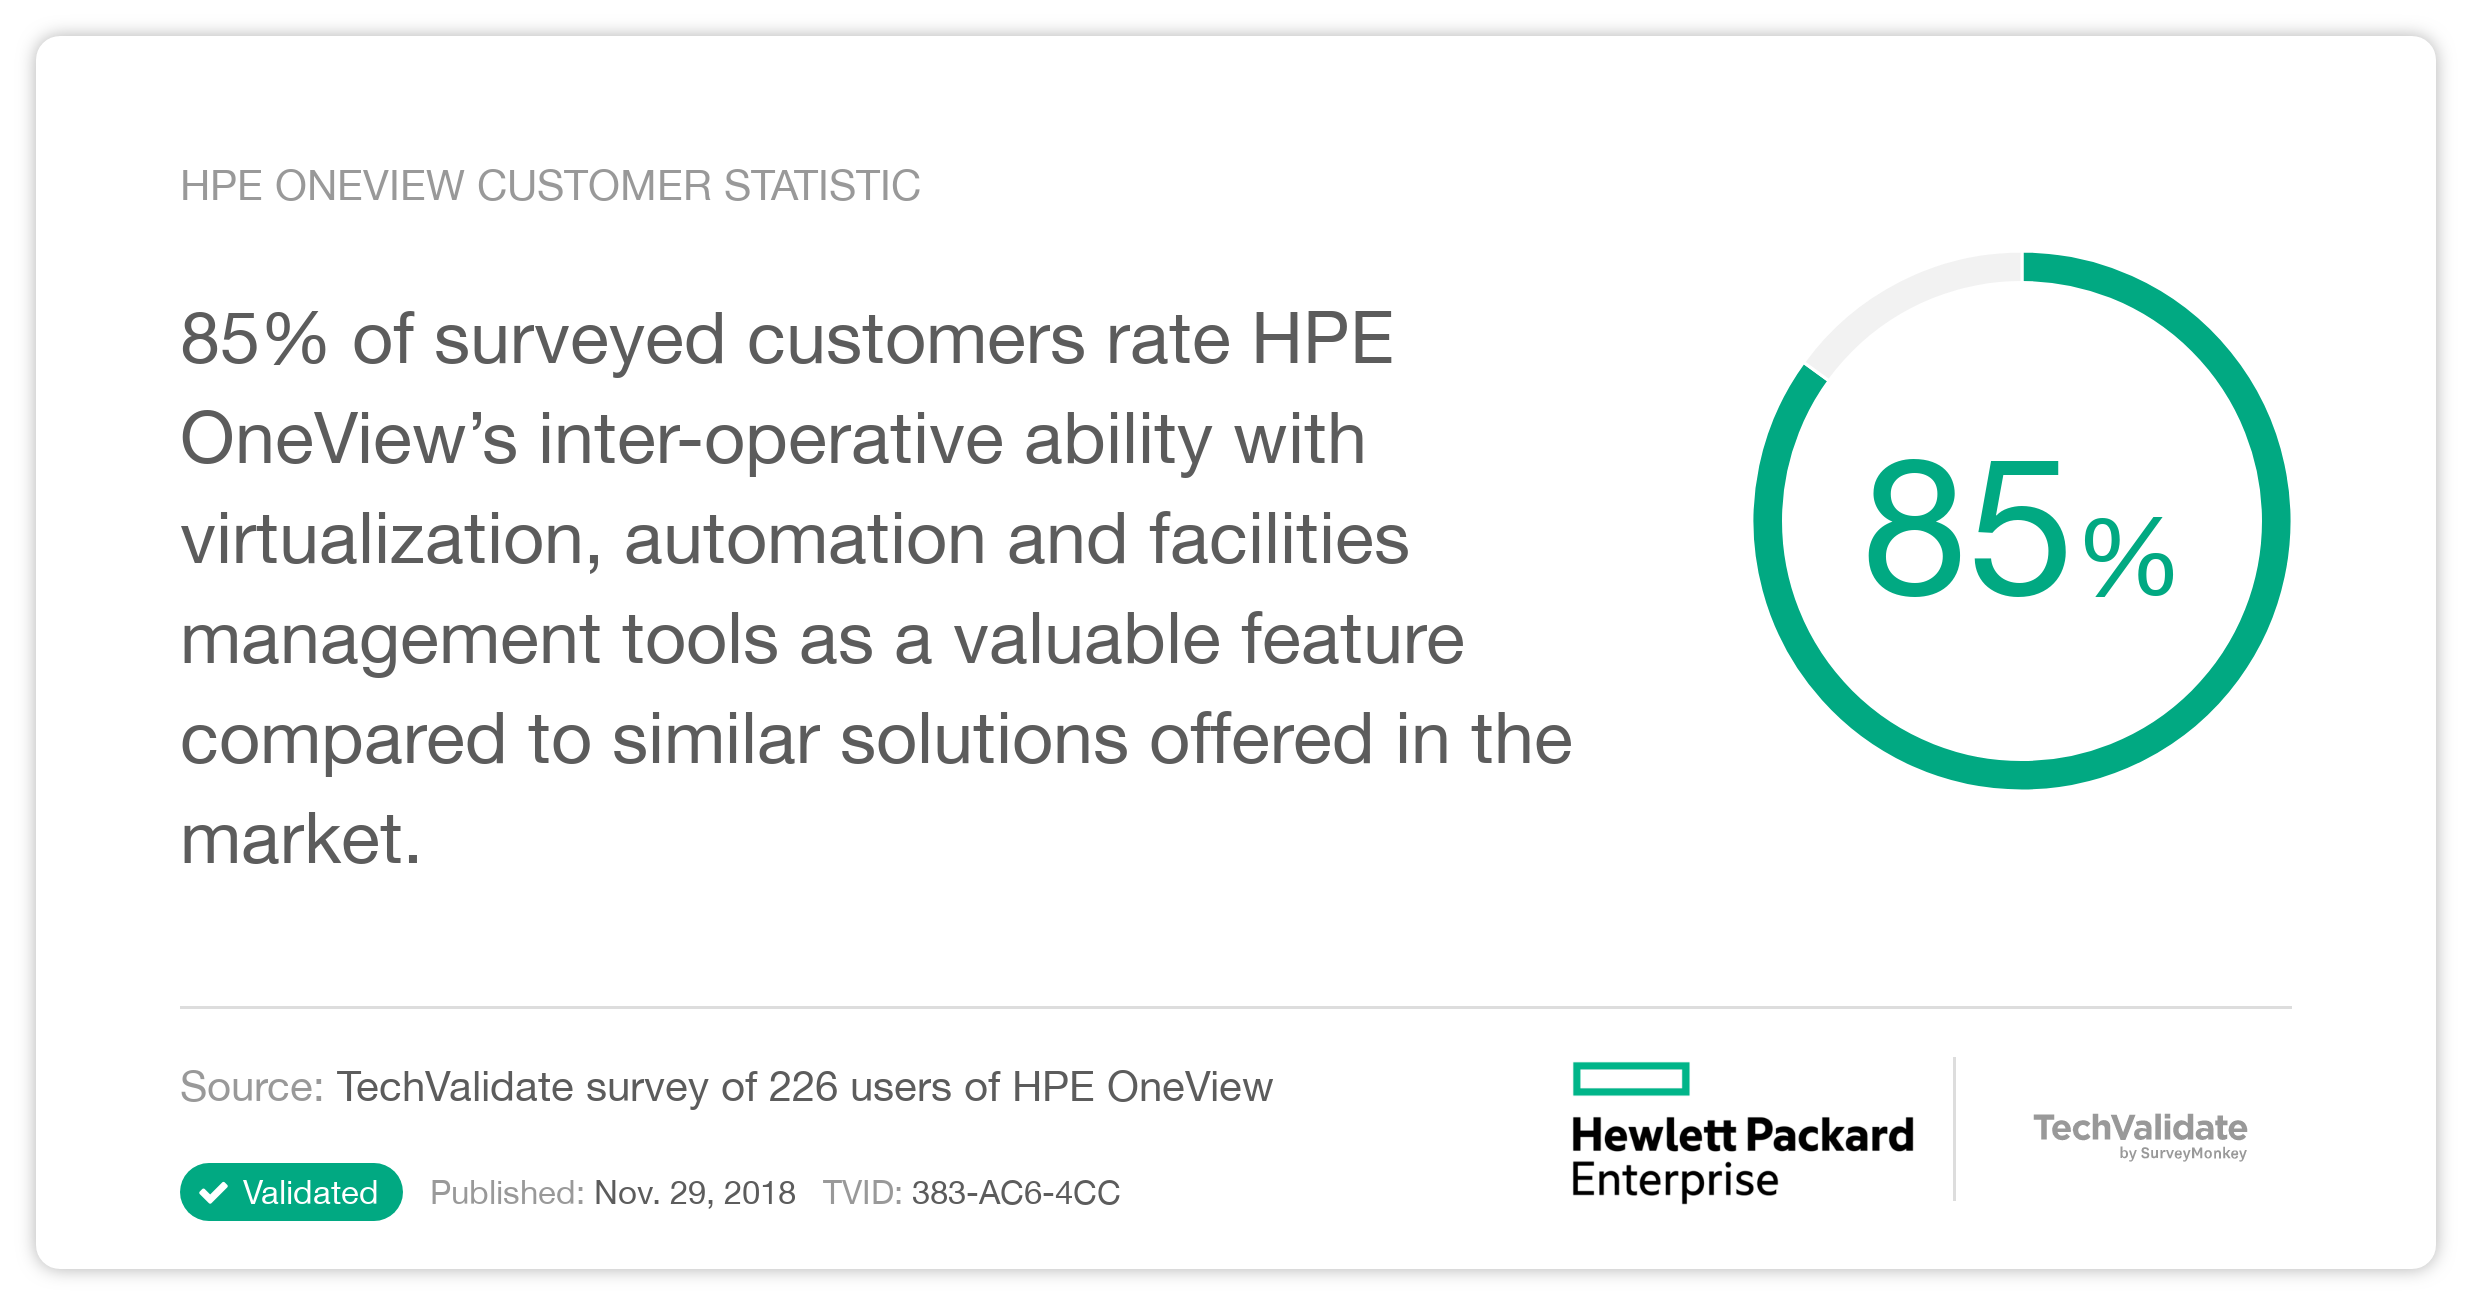 HPE OneView Customer Statistic